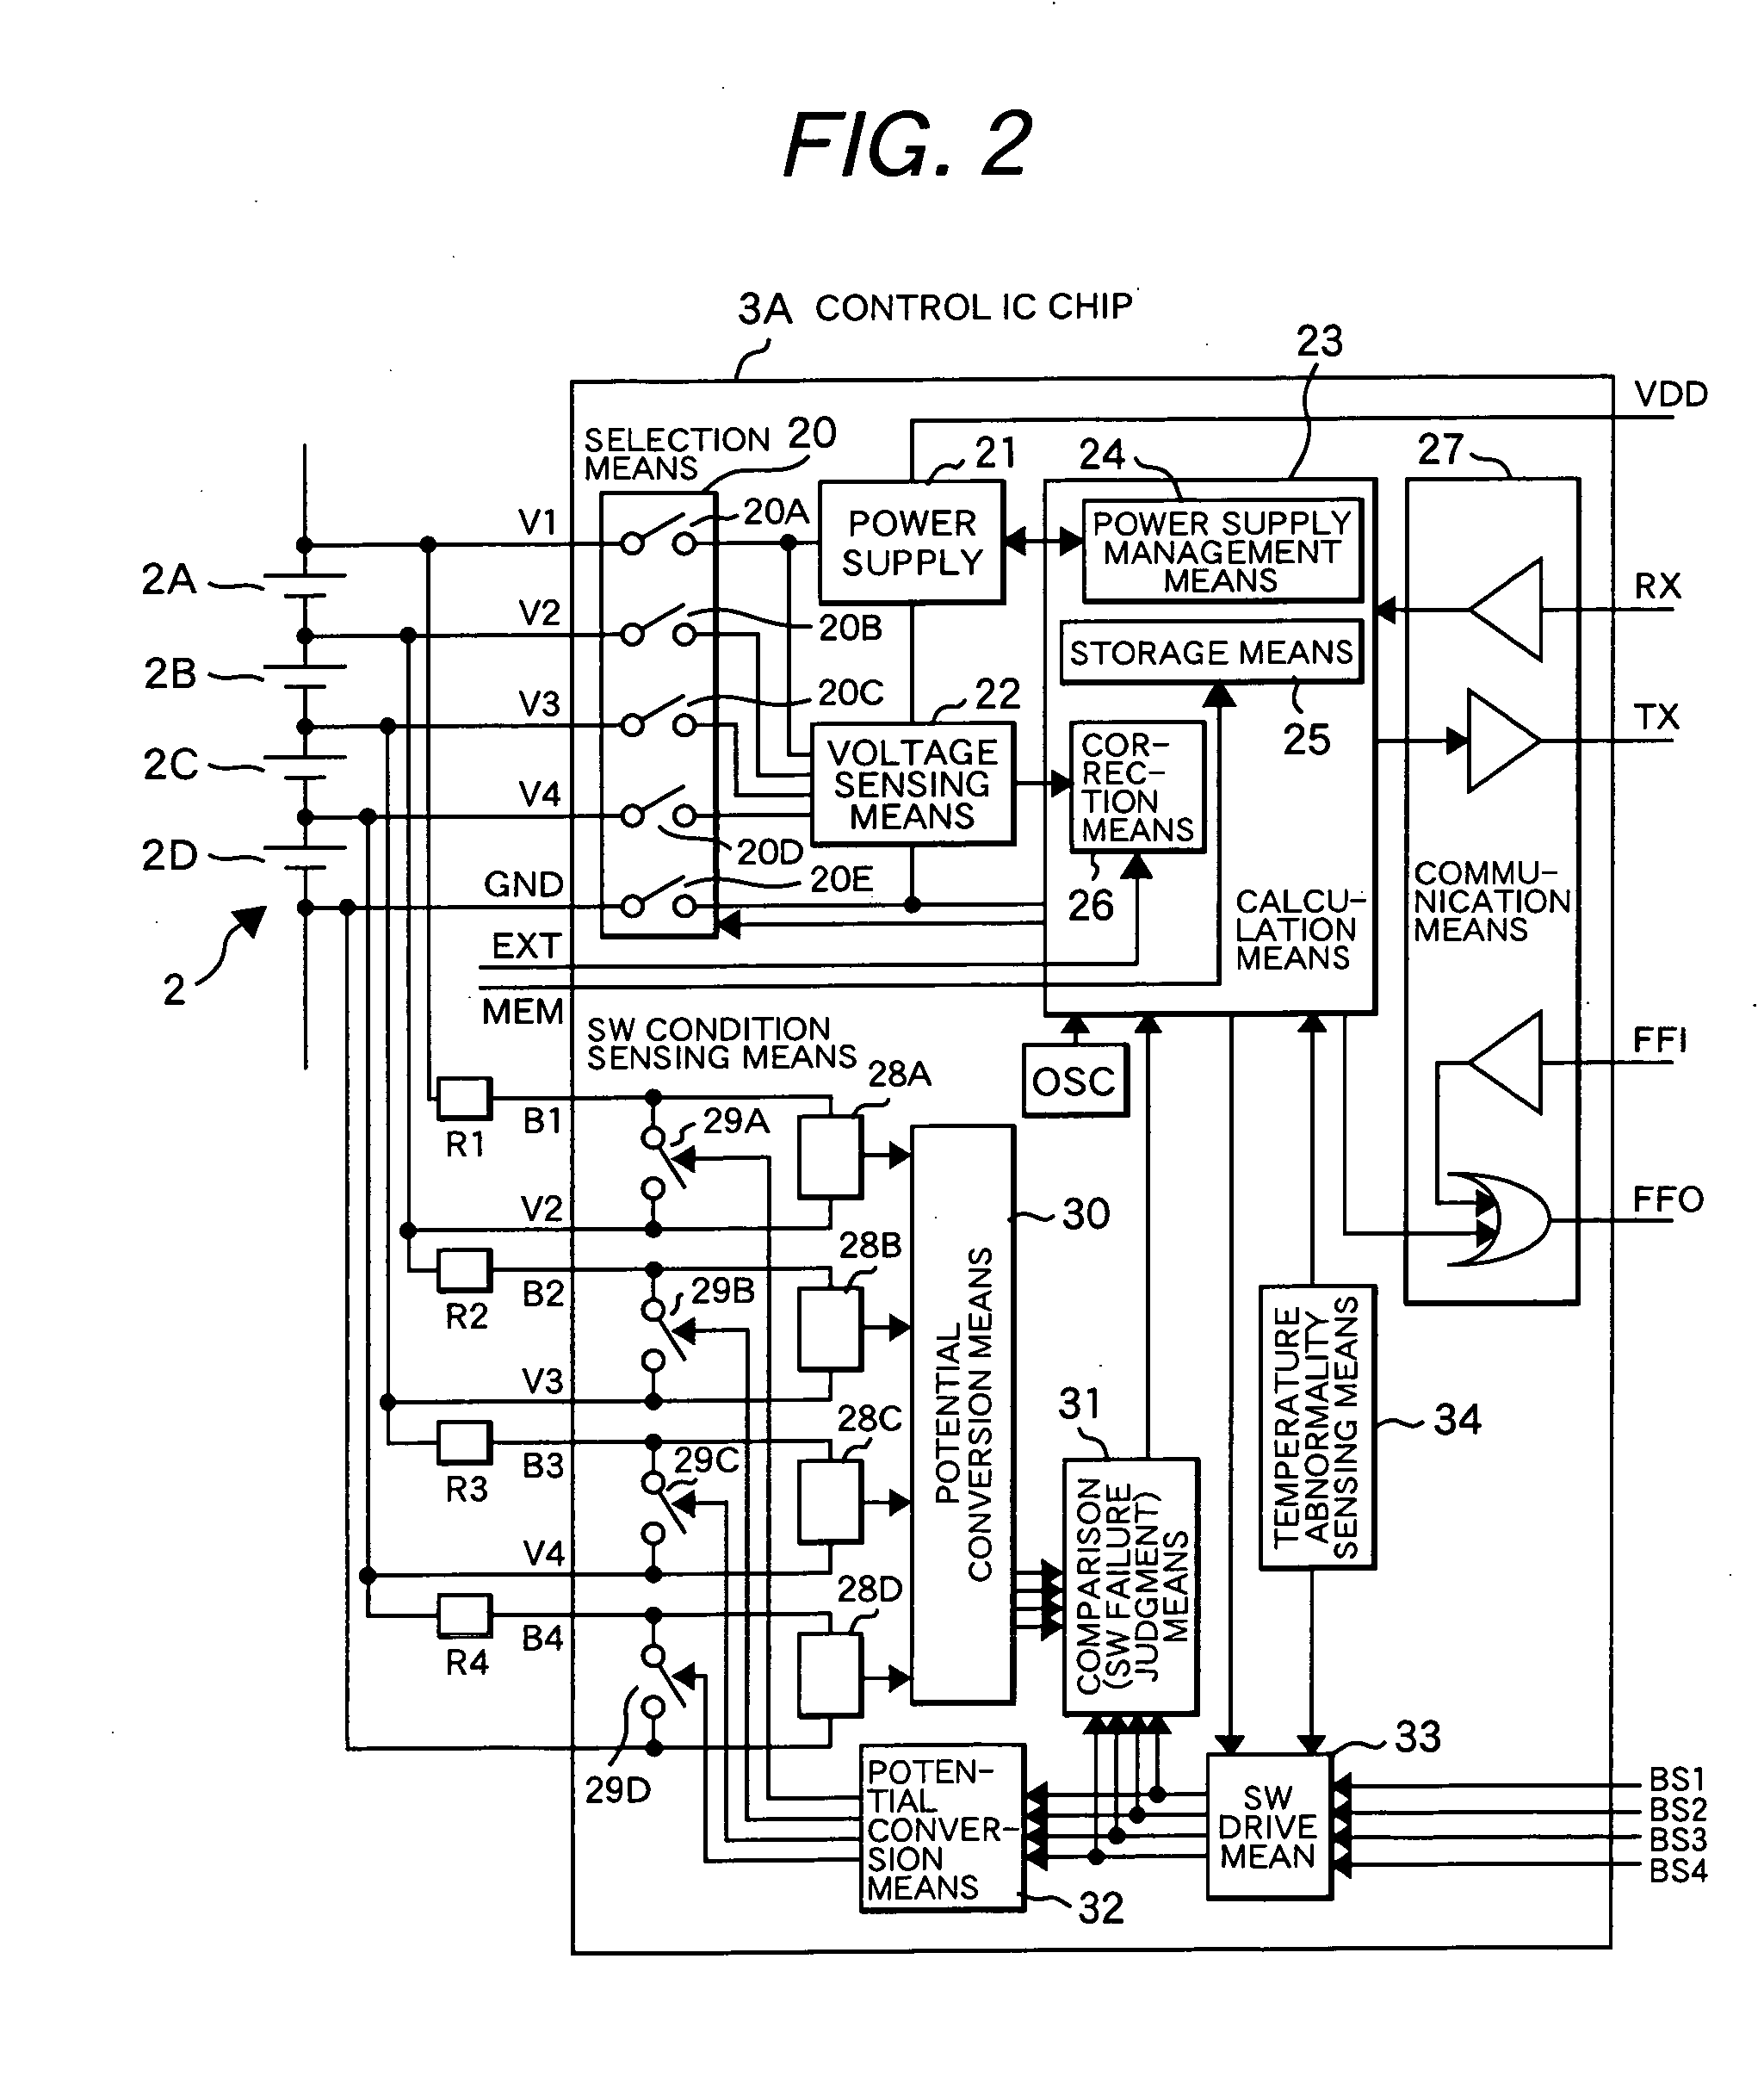 Multi-series battery control system